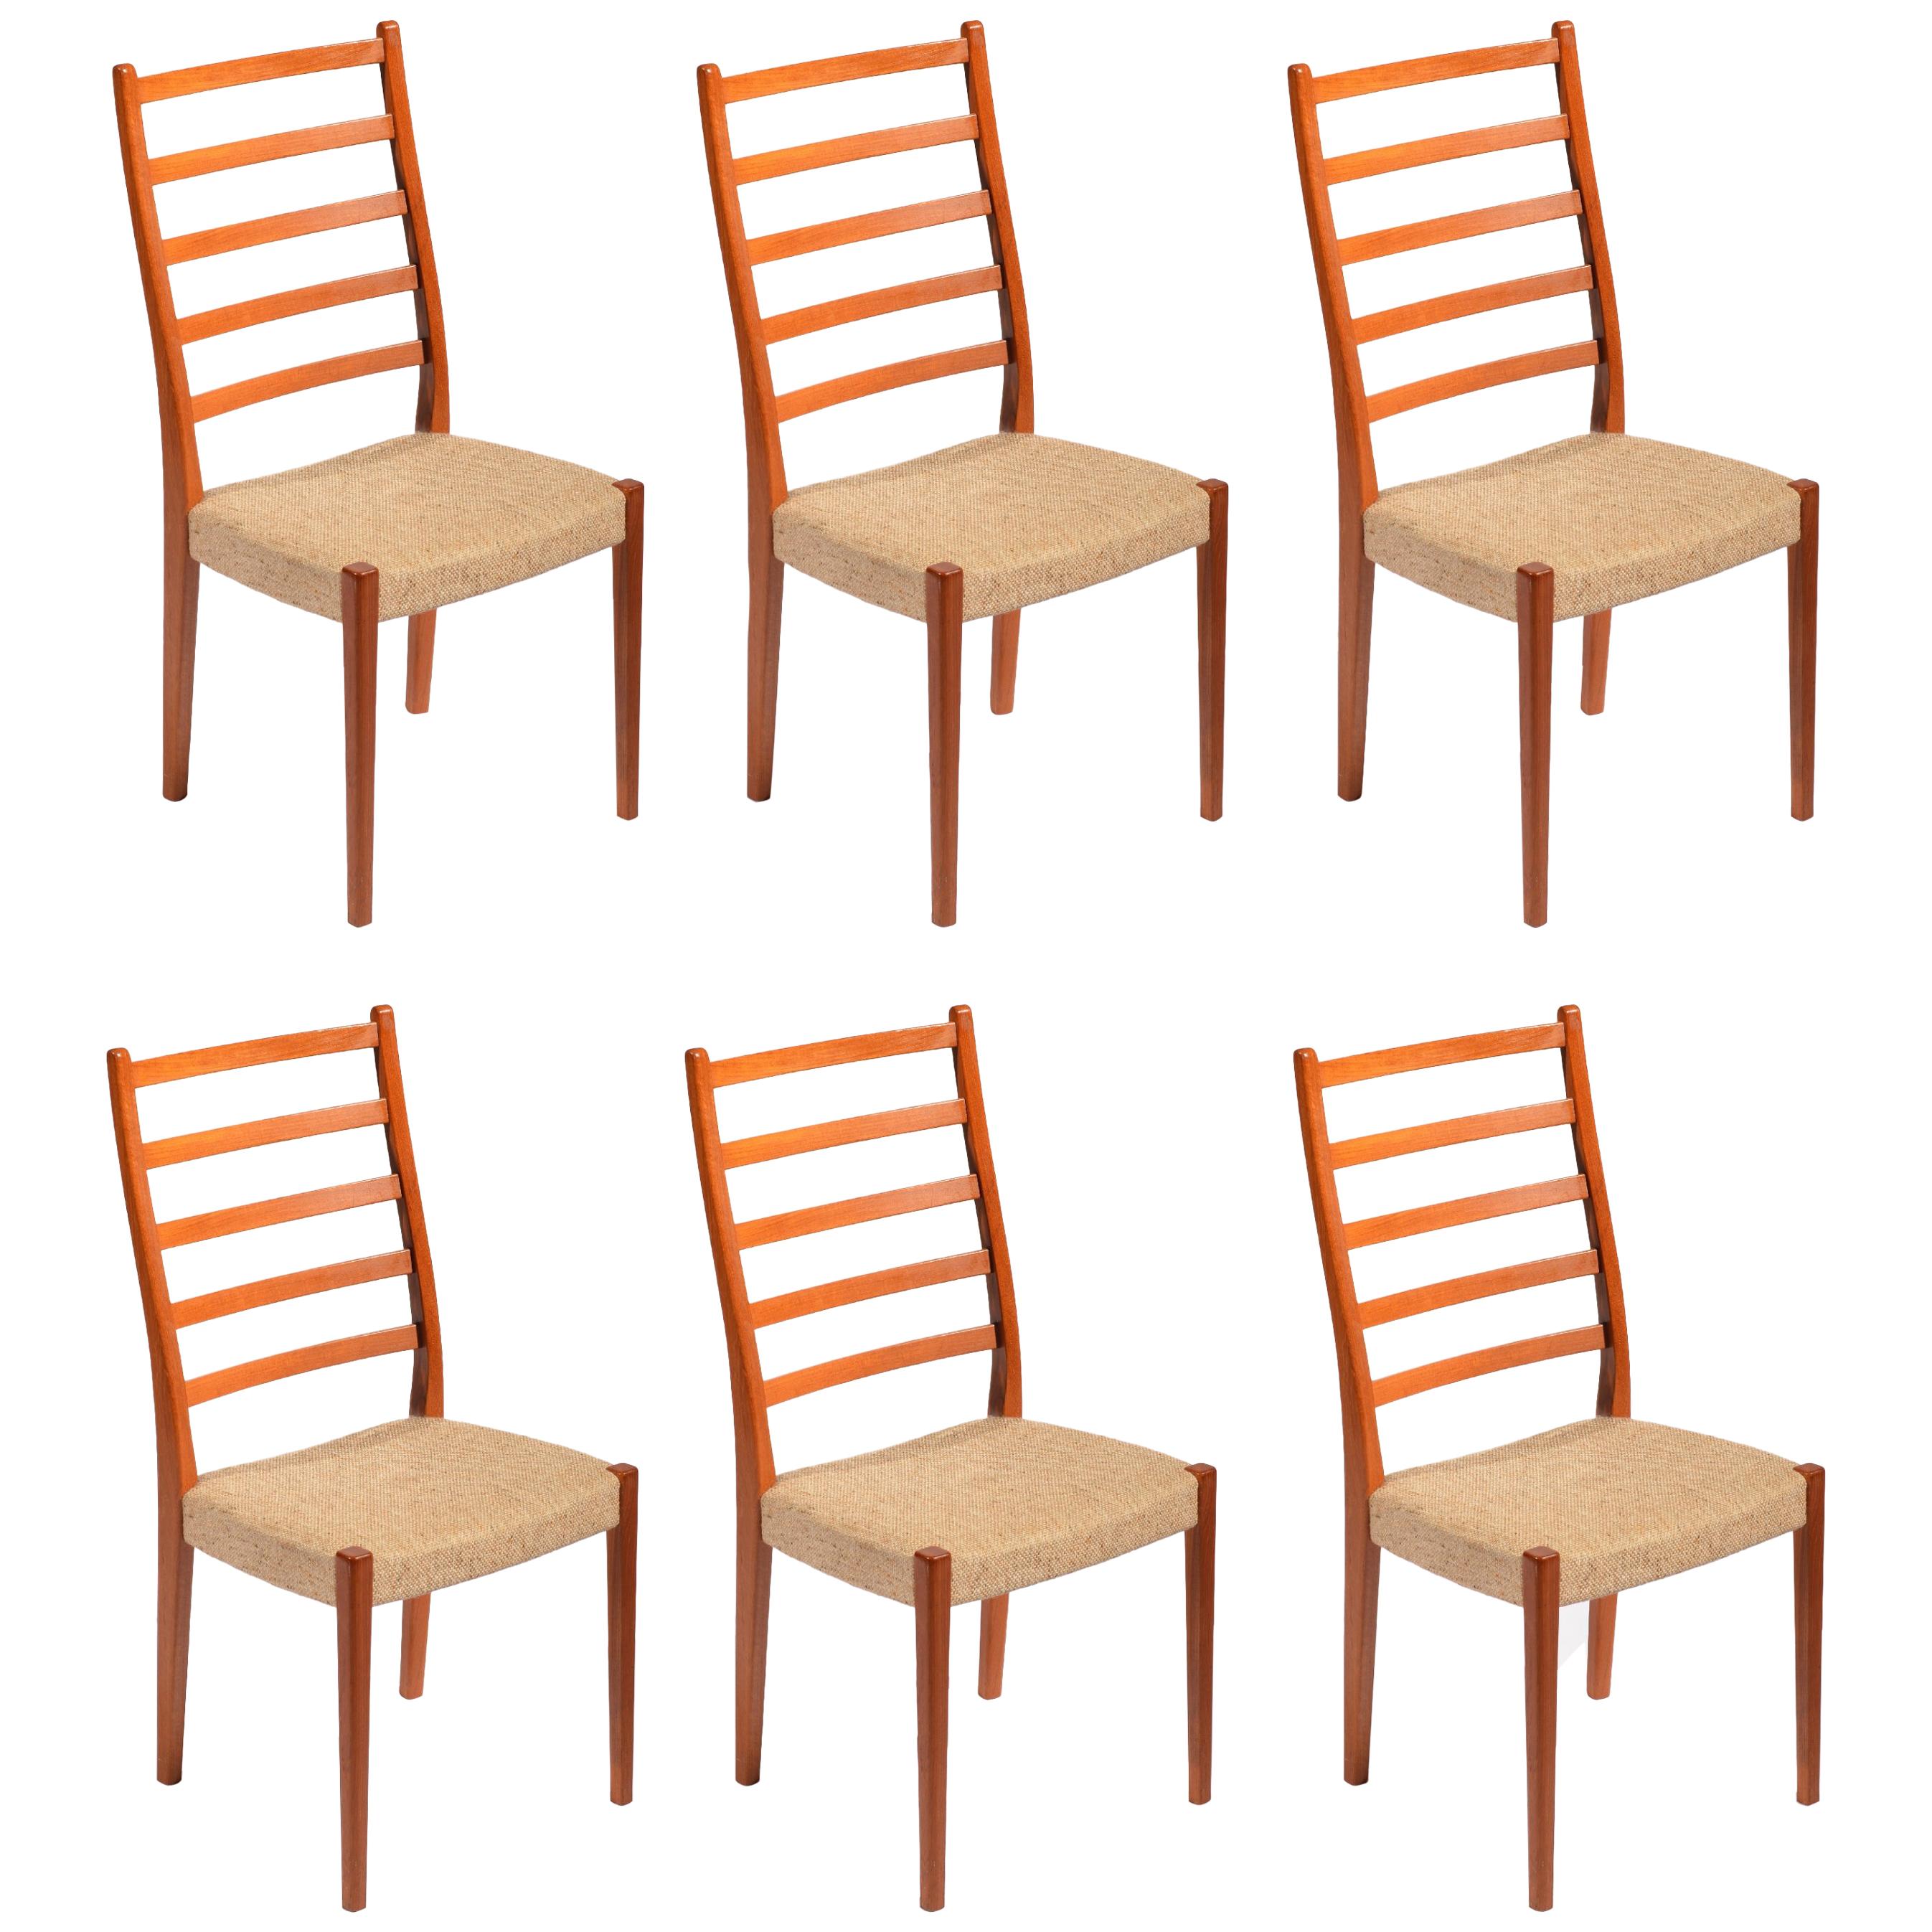 6 Teak Dining Chairs by Svegards Markaryd, Sweden For Sale